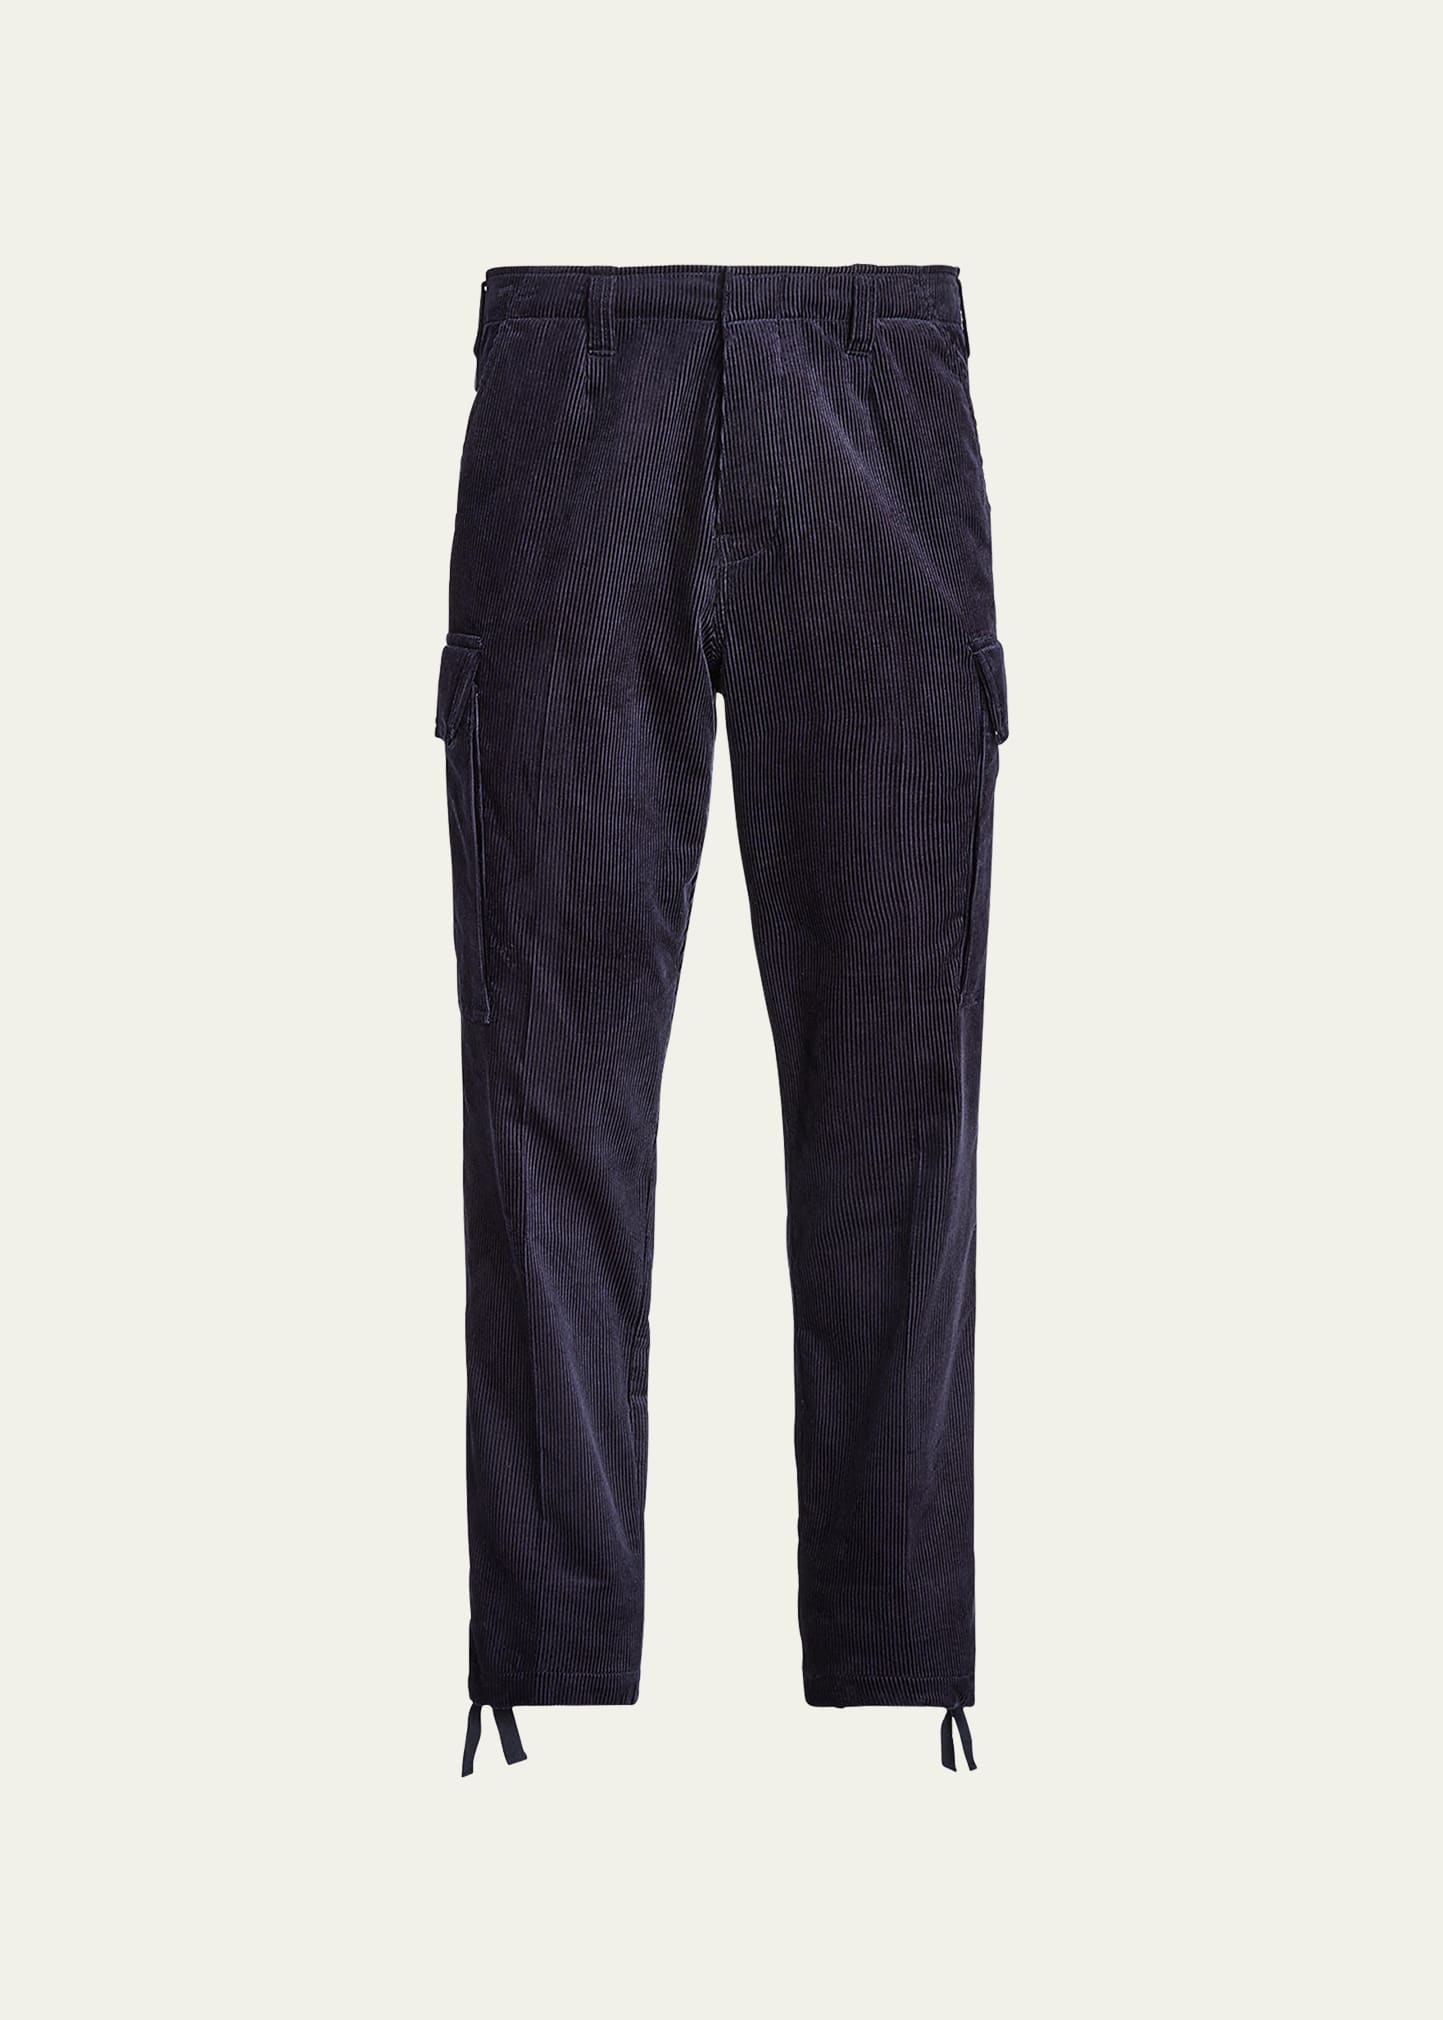 Men's Straight-Fit Corduroy Cargo Trousers